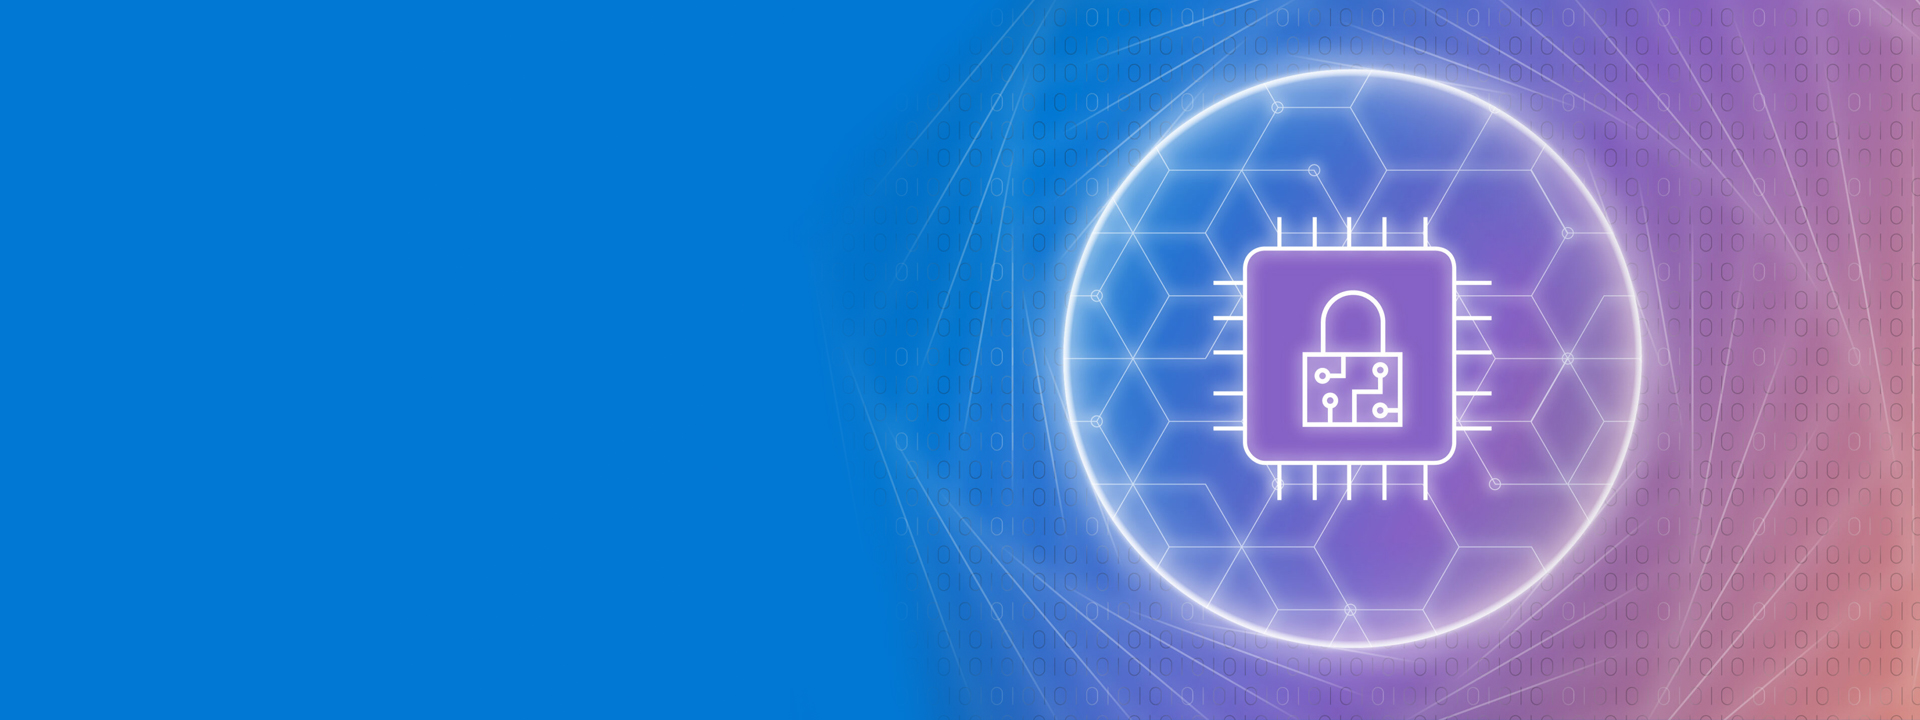 Microsoft confidential computing logo on an abstract blue and purple gradient background